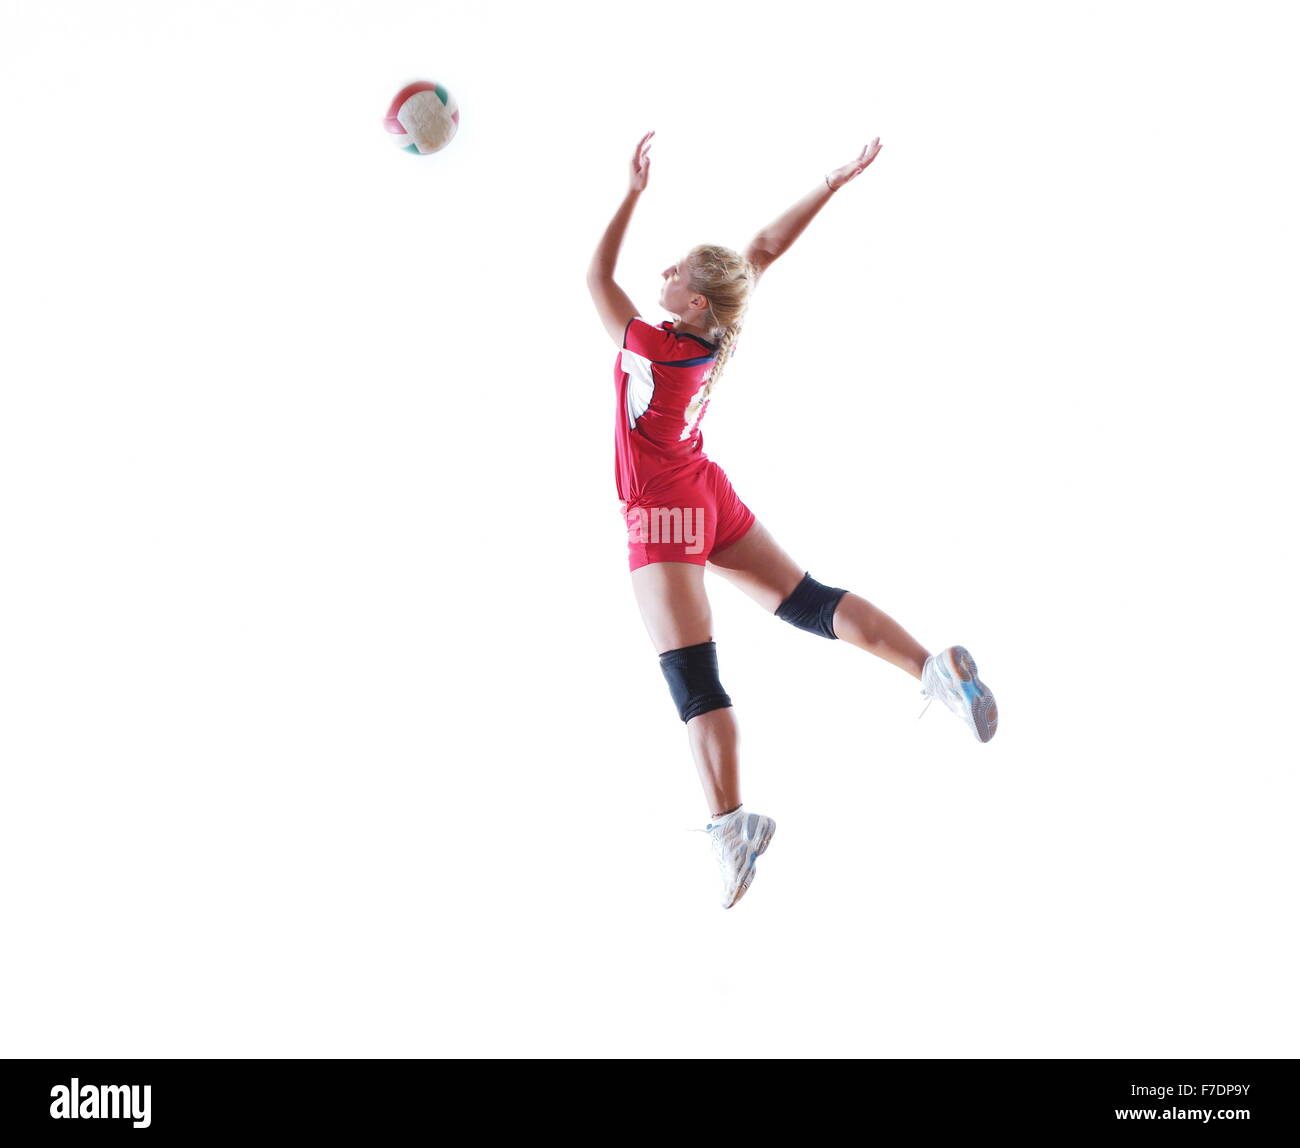 volleyball game sport with neautoful young girl oslated onver white background Stock Photo